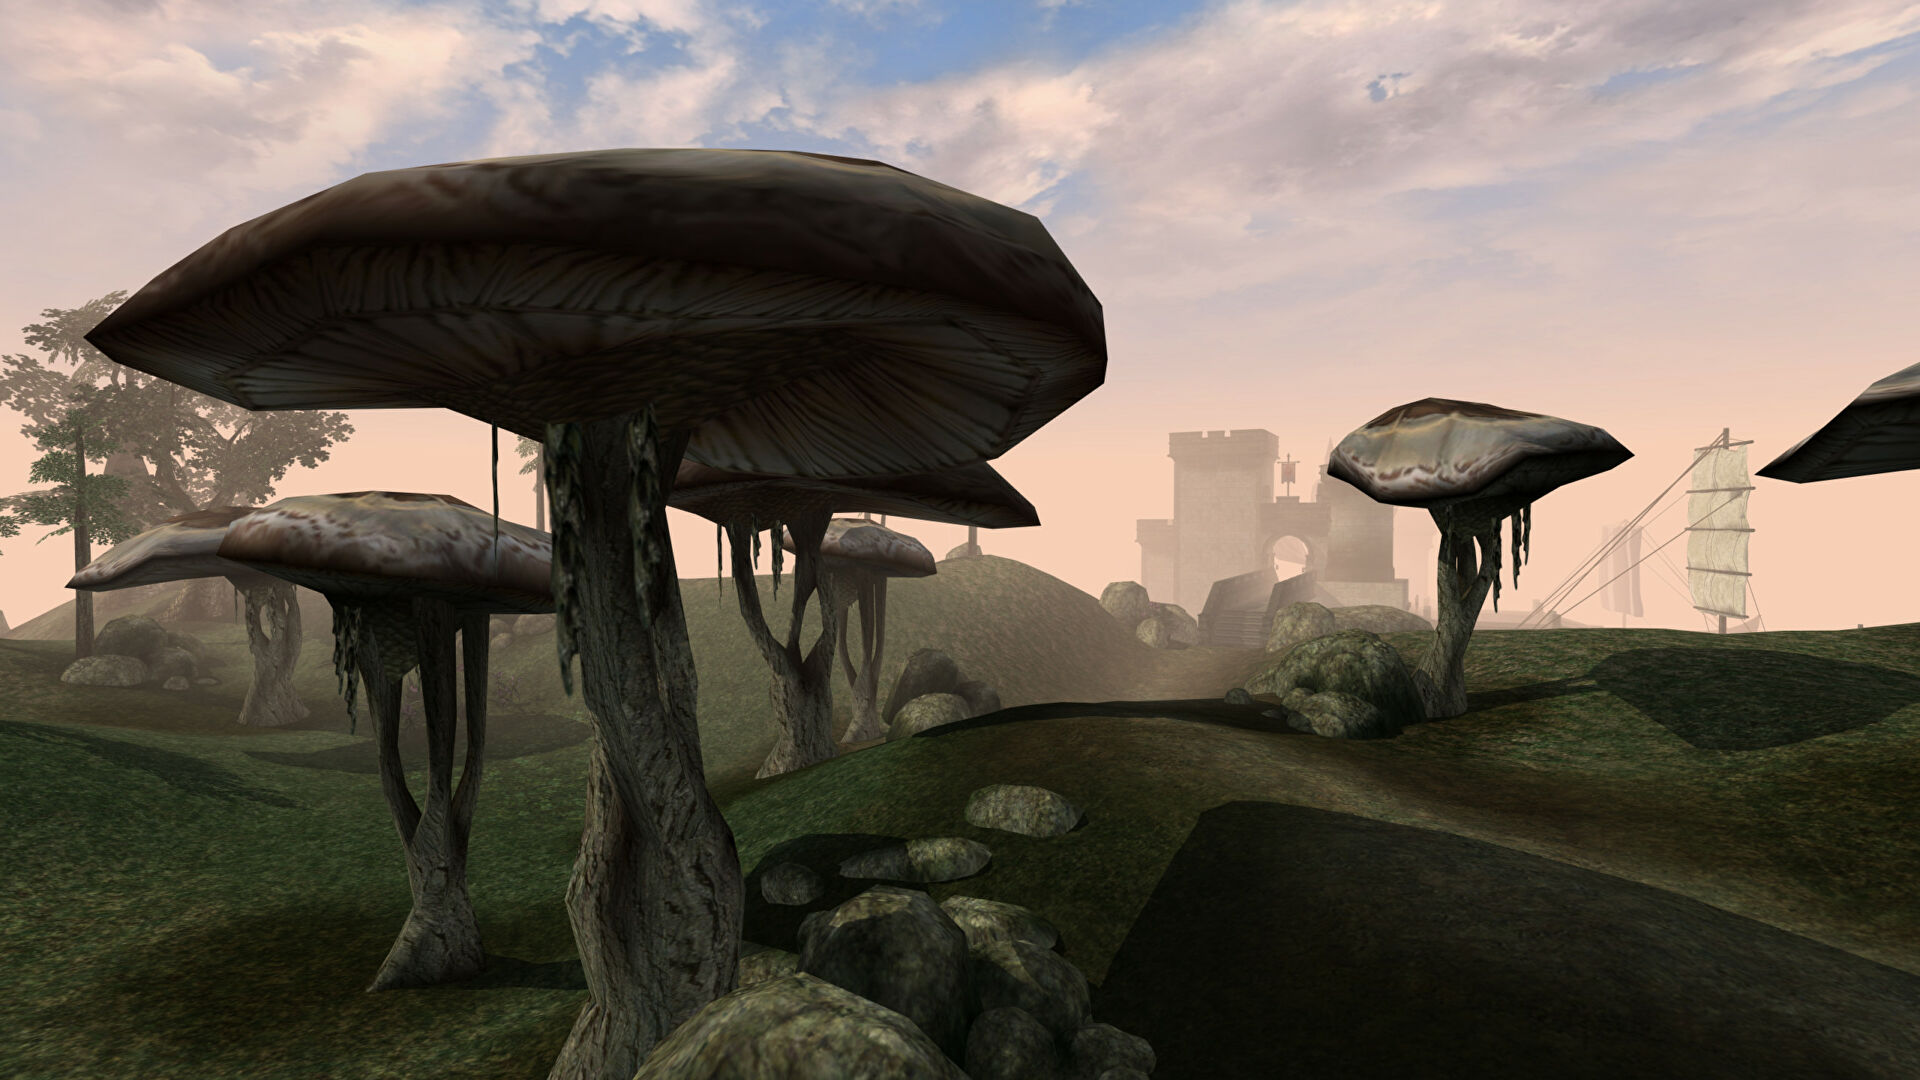 What’s better: character creation building backstory, or giant fungus?